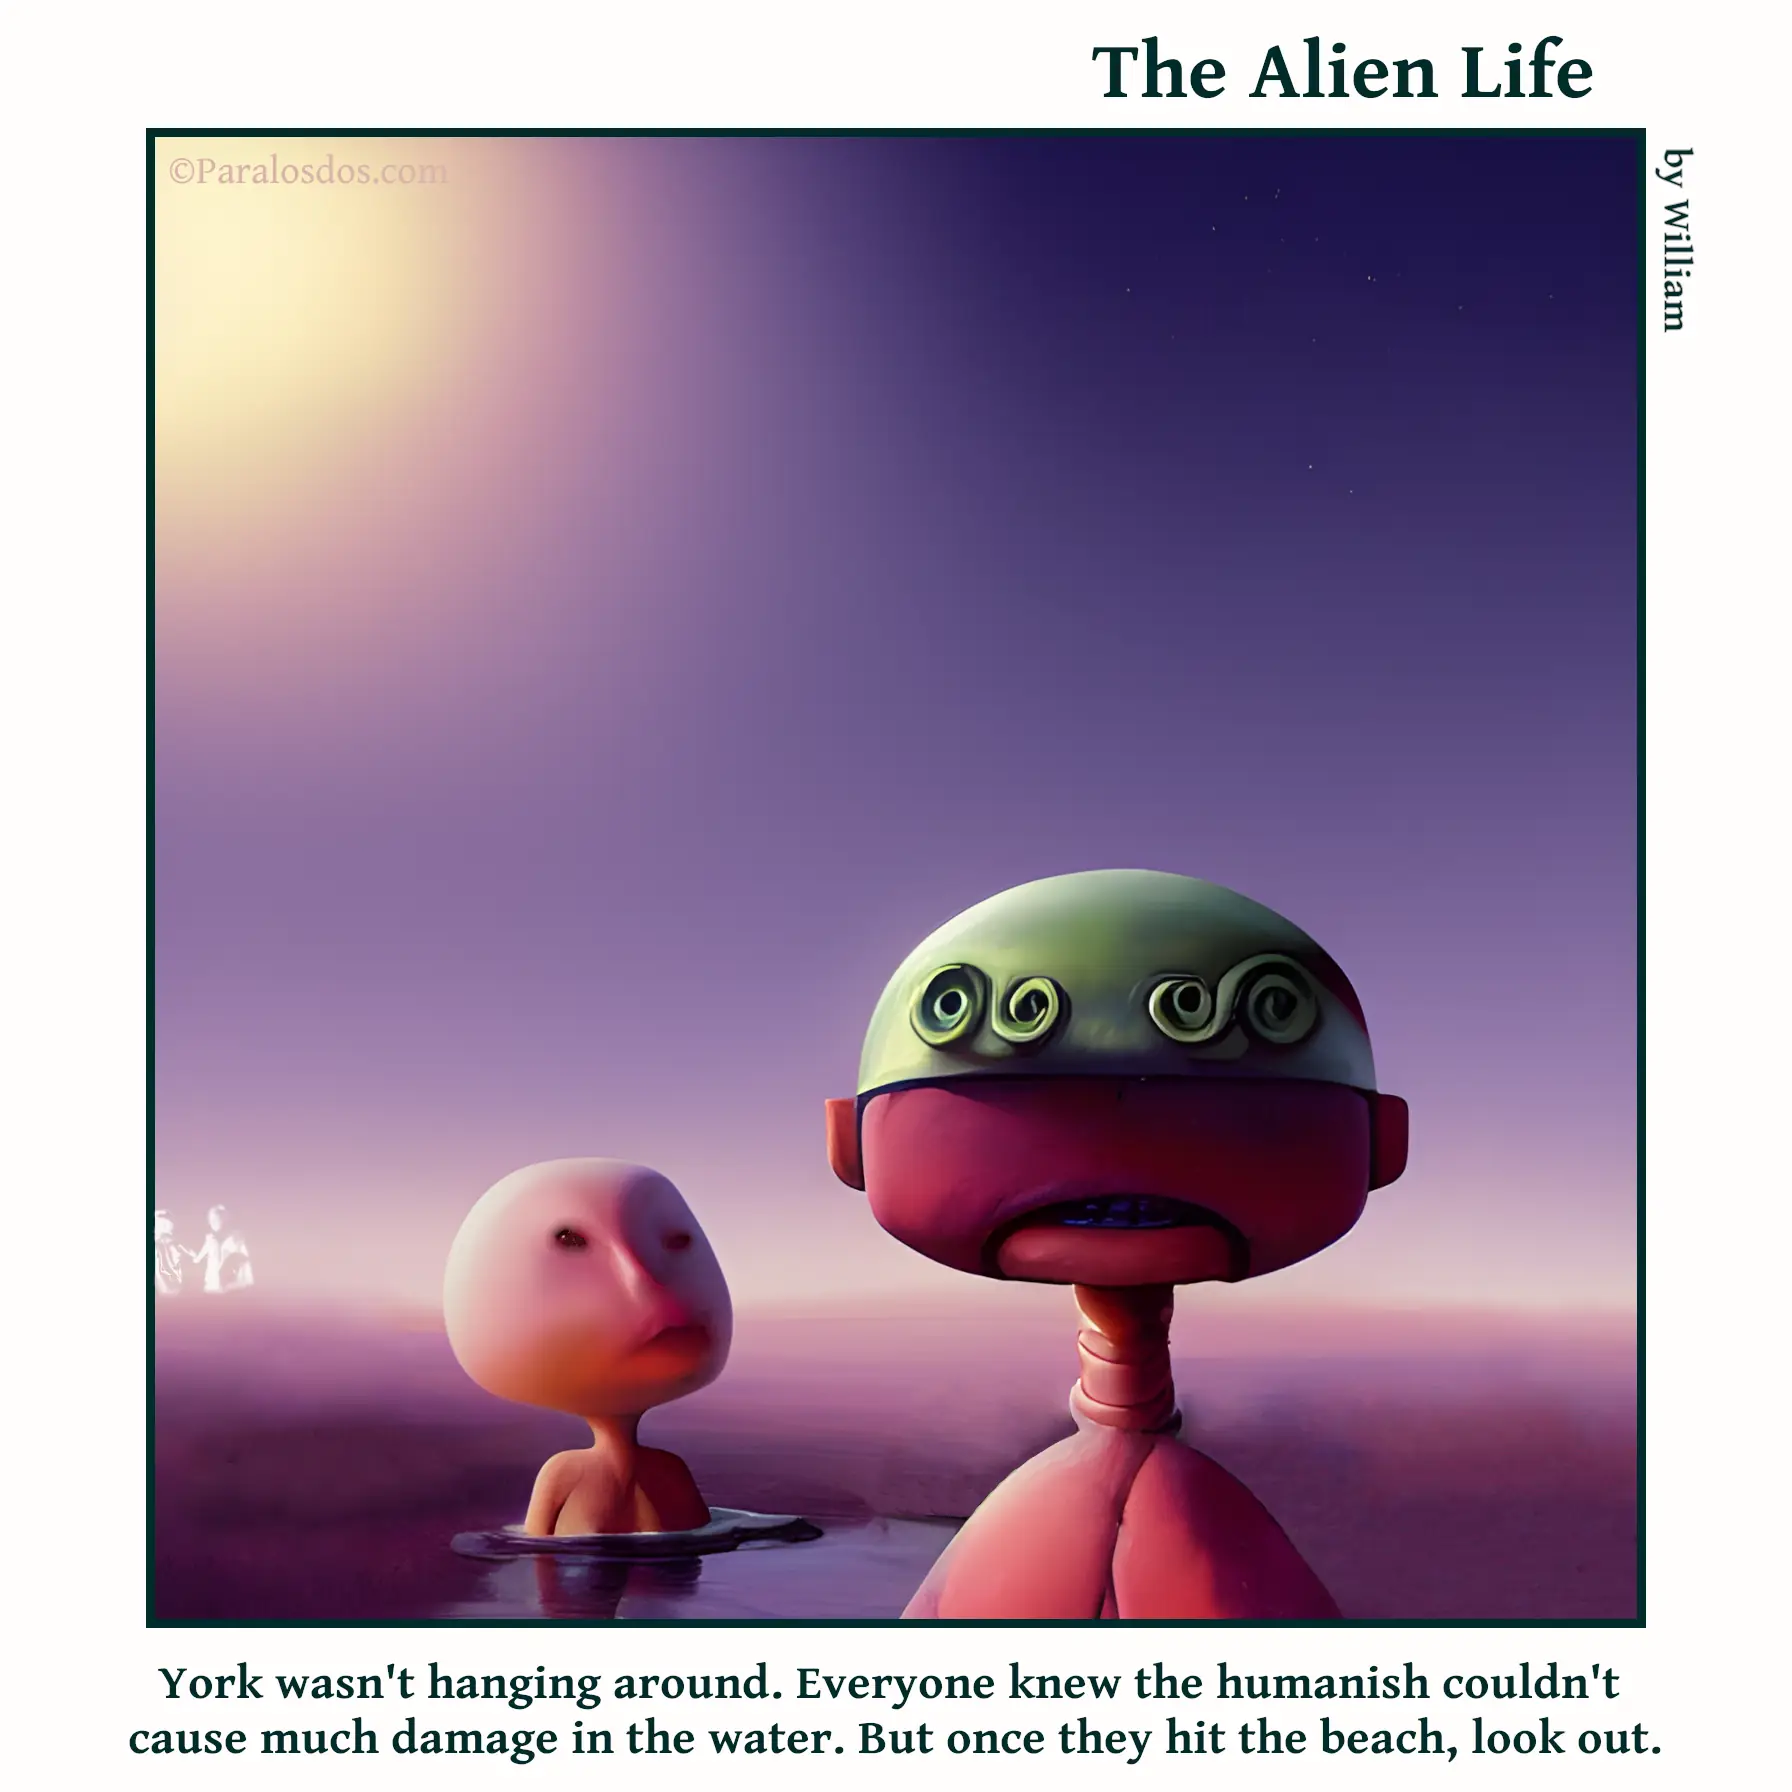 The Alien Life, one panel Comic. An alien is getting away from the ocean fast with a worried look. Behind him is a weird human looking figure emerging from the water. The caption reads: York wasn't hanging around. Everyone knew the humanish couldn't cause much damage in the water. But once they hit the beach, look out.